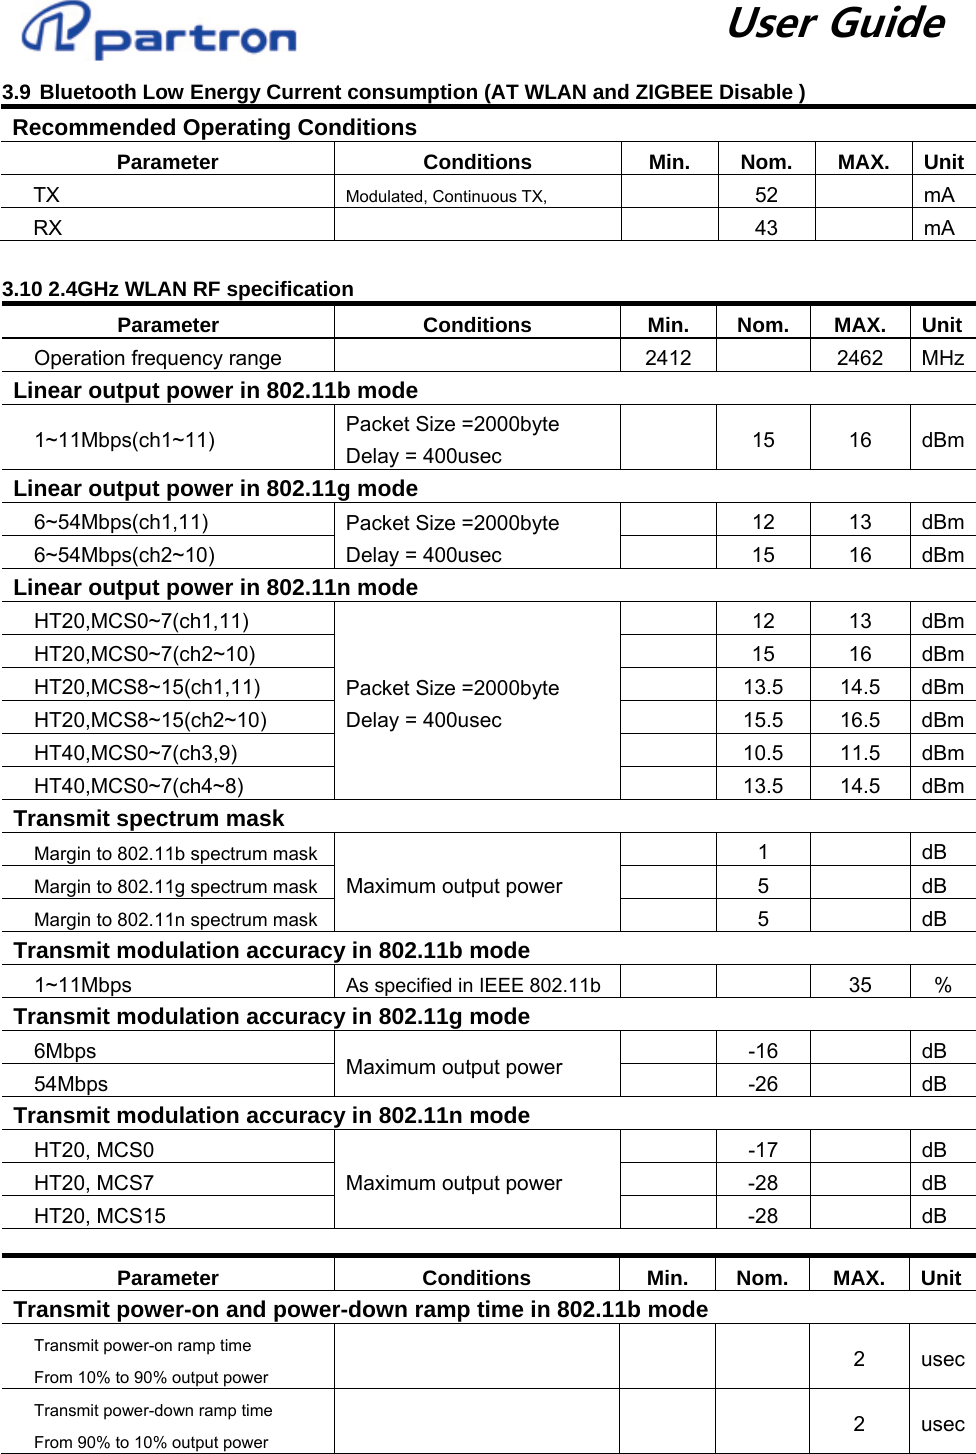                 User Guide        3.9 Bluetooth Low Energy Current consumption (AT WLAN and ZIGBEE Disable ) Recommended Operating Conditions Parameter Conditions Min. Nom. MAX. Unit TX  Modulated, Continuous TX,   52  mA RX    43  mA  3.10 2.4GHz WLAN RF specification   Parameter Conditions Min. Nom. MAX. Unit Operation frequency range    2412    2462  MHz Linear output power in 802.11b mode 1~11Mbps(ch1~11)  Packet Size =2000byte Delay = 400usec   15 16 dBm Linear output power in 802.11g mode 6~54Mbps(ch1,11)  Packet Size =2000byte Delay = 400usec  12 13 dBm 6~54Mbps(ch2~10)  15 16 dBm Linear output power in 802.11n mode HT20,MCS0~7(ch1,11) Packet Size =2000byte Delay = 400usec  12 13 dBm HT20,MCS0~7(ch2~10)  15 16 dBm HT20,MCS8~15(ch1,11)  13.5 14.5 dBm HT20,MCS8~15(ch2~10)  15.5 16.5 dBm HT40,MCS0~7(ch3,9)  10.5 11.5 dBm HT40,MCS0~7(ch4~8)  13.5 14.5 dBm Transmit spectrum mask Margin to 802.11b spectrum mask Maximum output power  1  dB Margin to 802.11g spectrum mask   5  dB Margin to 802.11n spectrum mask   5  dB Transmit modulation accuracy in 802.11b mode 1~11Mbps  As specified in IEEE 802.11b    35 % Transmit modulation accuracy in 802.11g mode 6Mbps  Maximum output power   -16  dB 54Mbps  -26  dB Transmit modulation accuracy in 802.11n mode HT20, MCS0 Maximum output power  -17  dB HT20, MCS7    -28    dB HT20, MCS15    -28    dB  Parameter Conditions Min. Nom. MAX. Unit Transmit power-on and power-down ramp time in 802.11b mode Transmit power-on ramp time From 10% to 90% output power    2 usec Transmit power-down ramp time From 90% to 10% output power    2 usec   